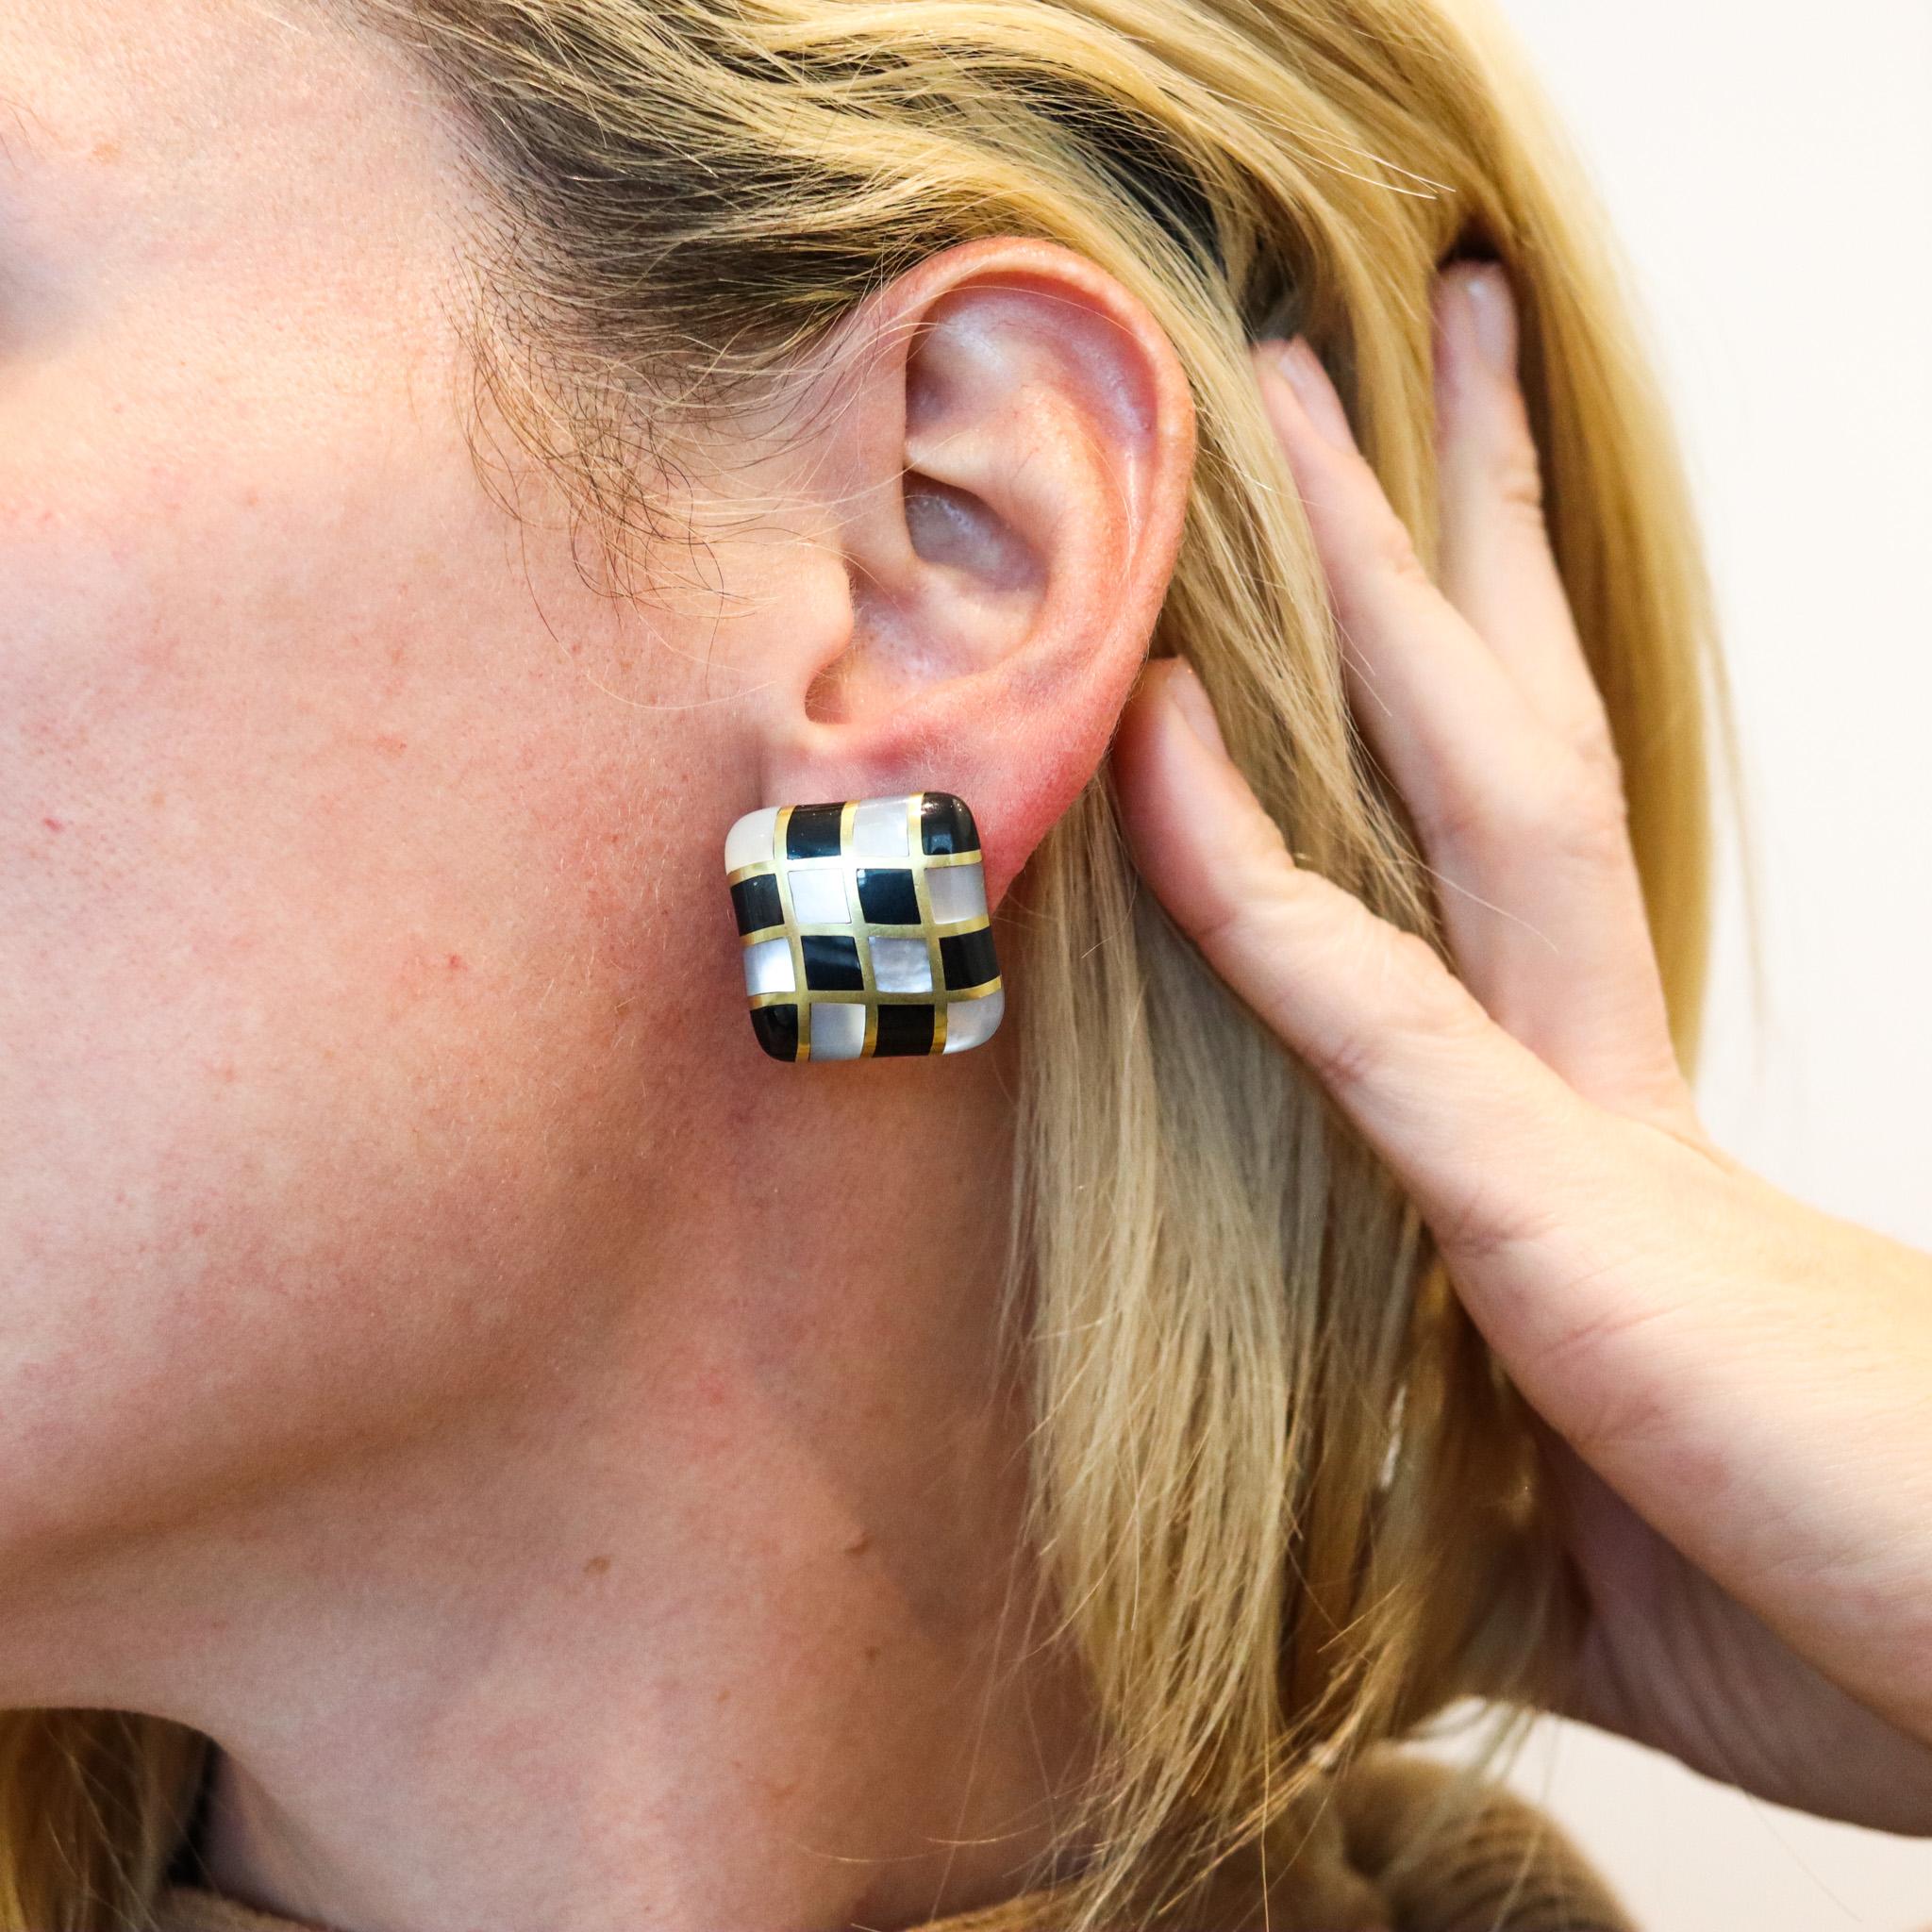 Checkerboard Earrings designed by Angela Cummings.

Beautiful vintage squared pieces, created by Angela Cummings in New York, back in the 1984 This pair of earrings are very rare and they was carefully crafted with geometric patterns in solid yellow